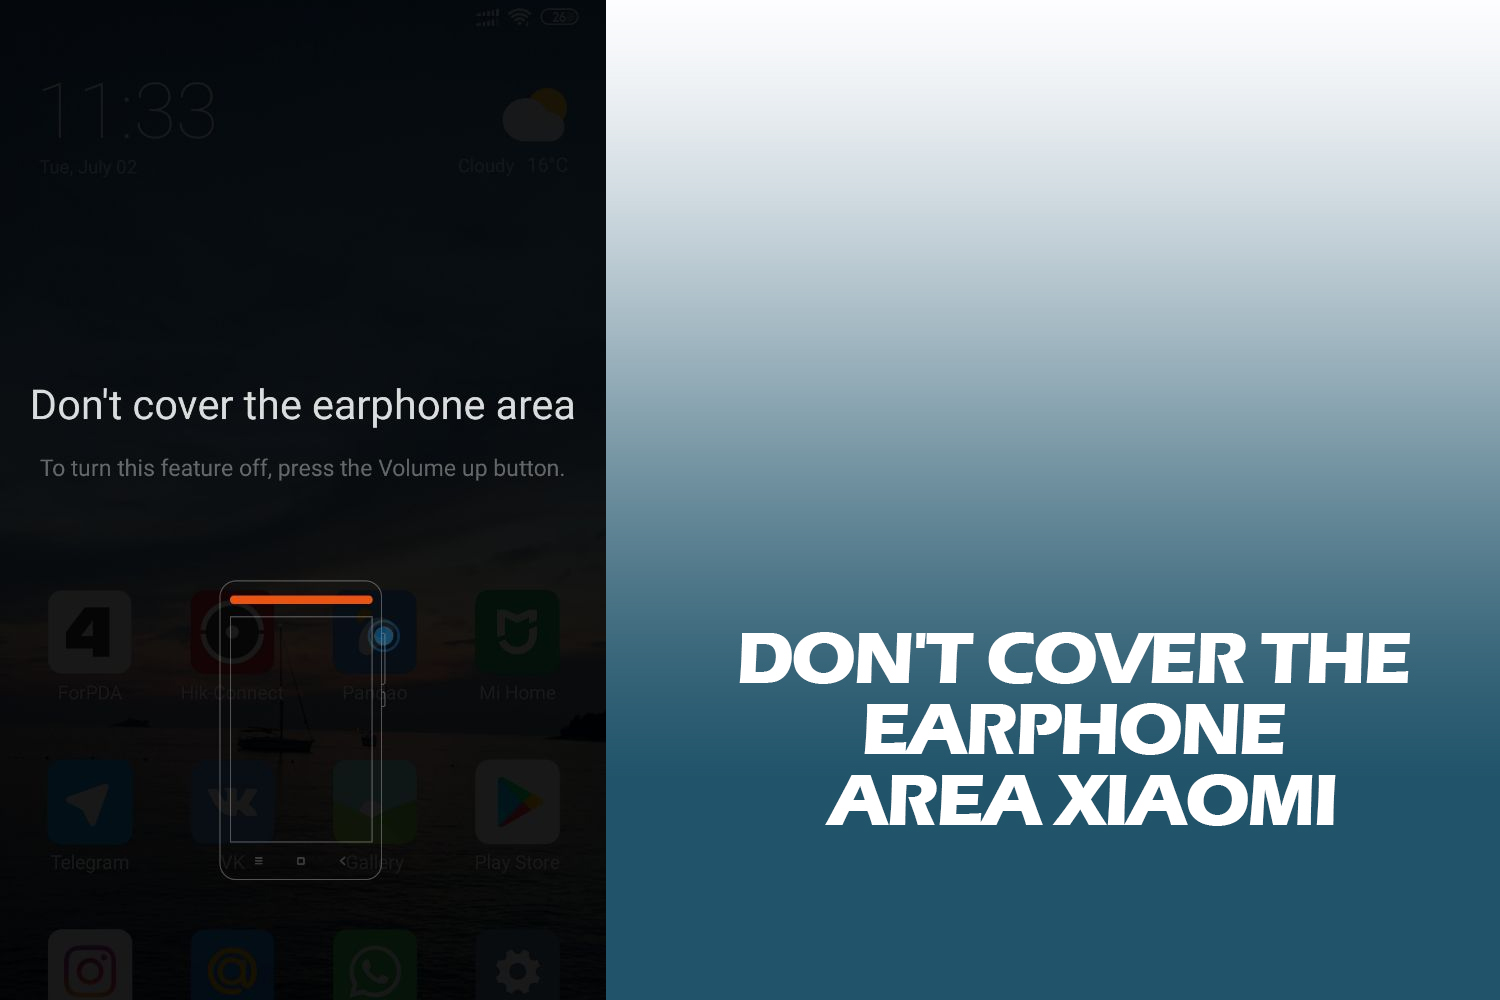 Don't Cover The Earphone Area Xiaomi